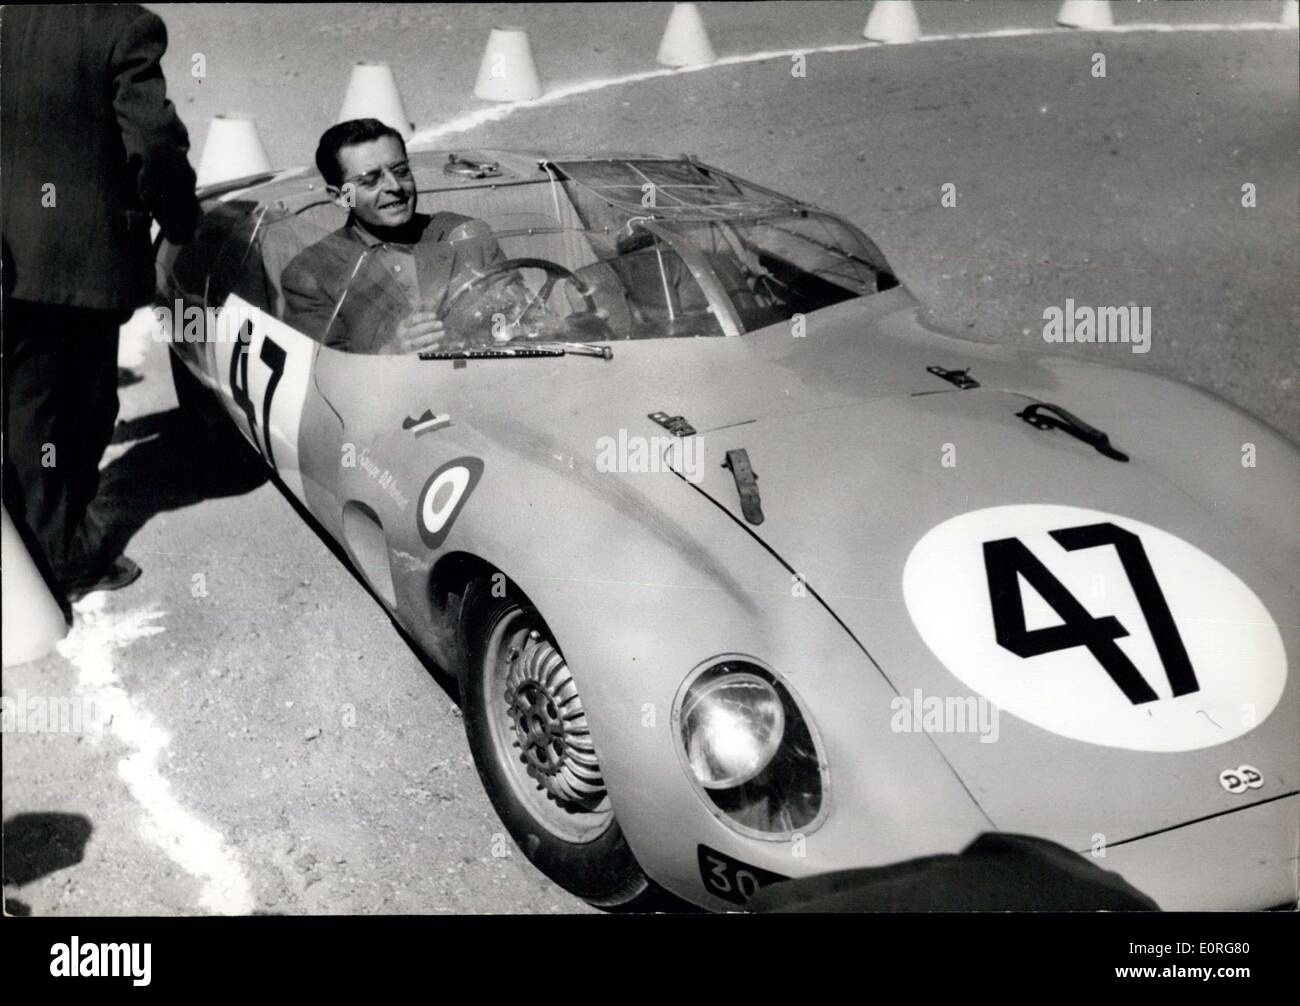 Jun. 17, 1959 - Before The ''24 Heures DU Mans'' Car-Race. The Annual Car-Race of the 24 hours of Le Mans, will start in Le Mans Near Paris on next Saturday. The cars which will take part in the race were controlled in Le Mans to-day. OPS: Pierre Chancel in his D.B. 47 during the control test. Stock Photo